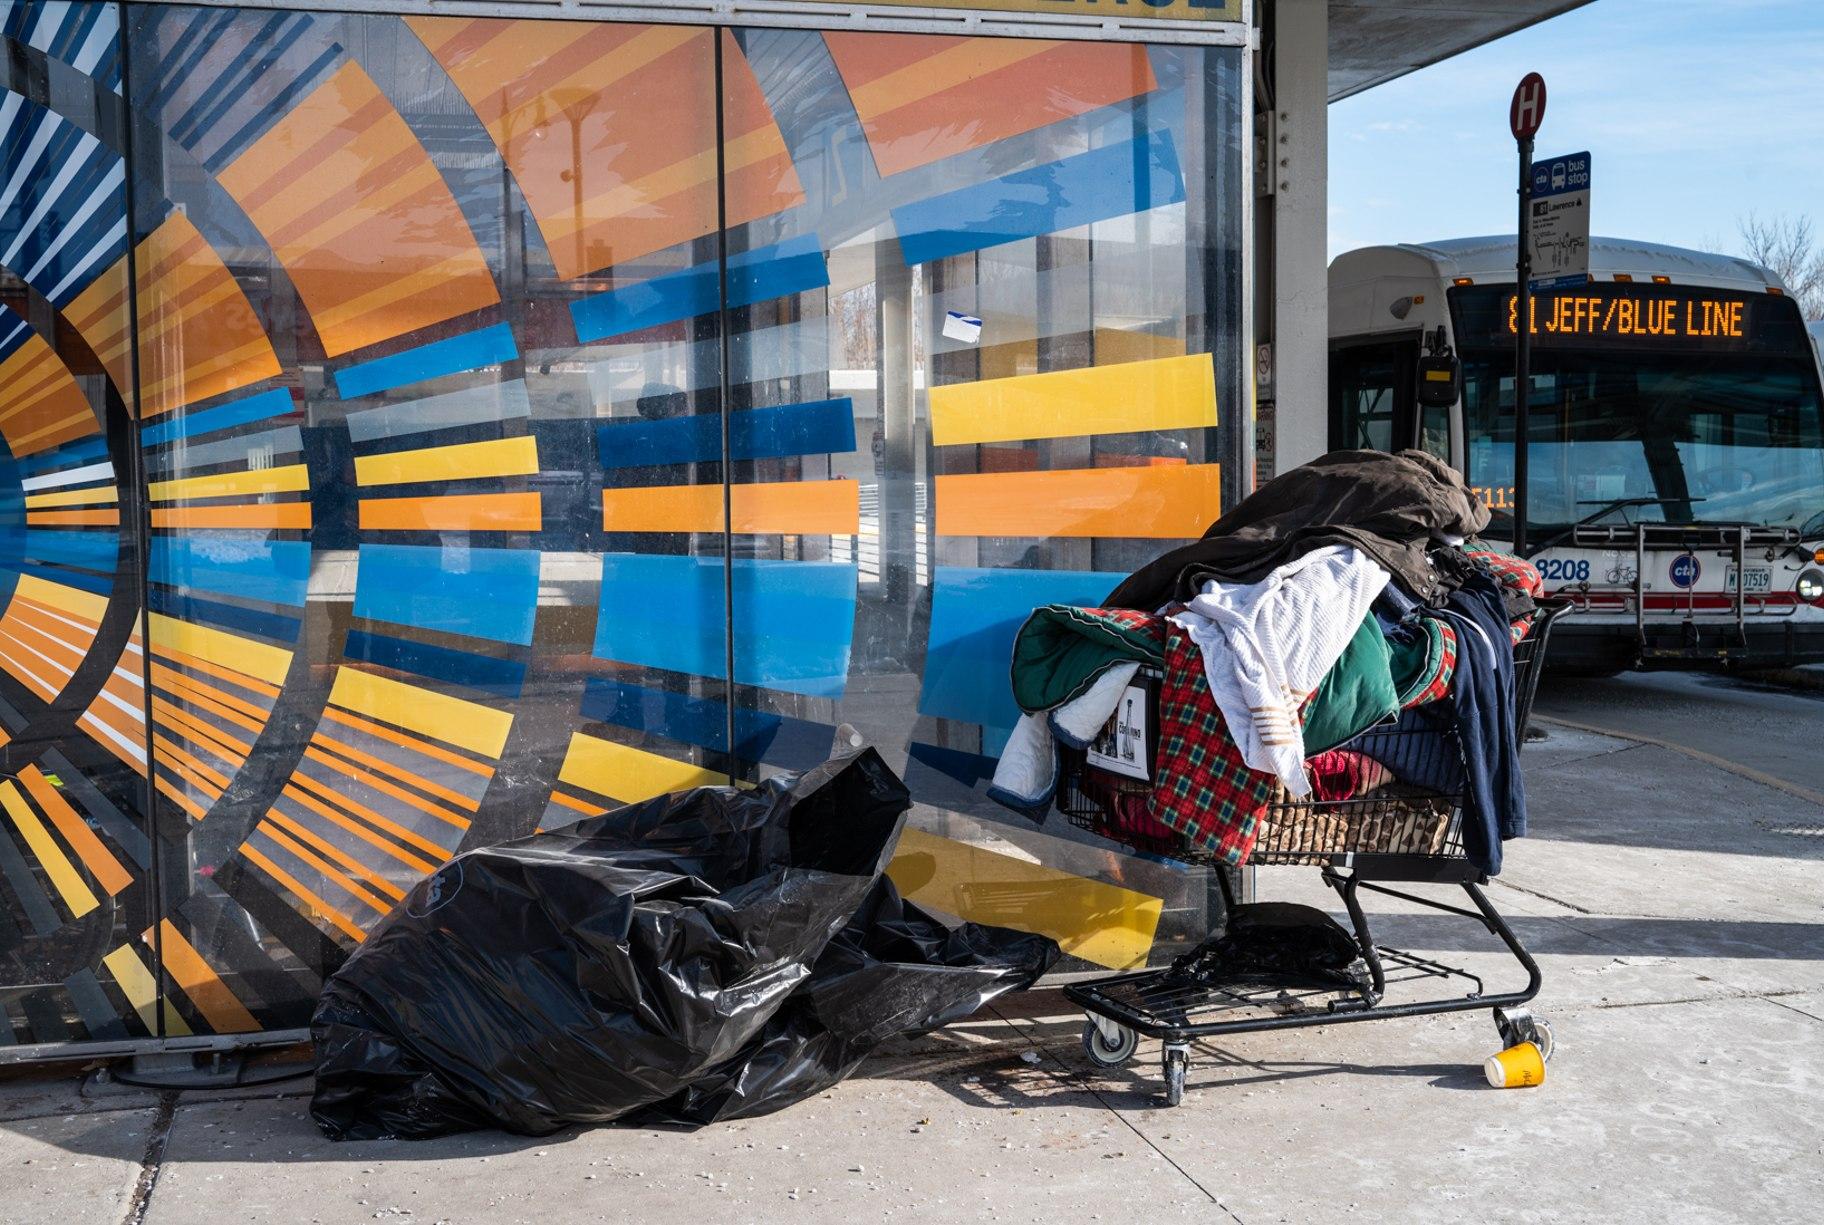 A homeless person’s belongings sit in a shopping cart and trash bag at the Jefferson Park Blue Line station on Jan. 31, 2023. (Colin Boyle / Block Club Chicago)